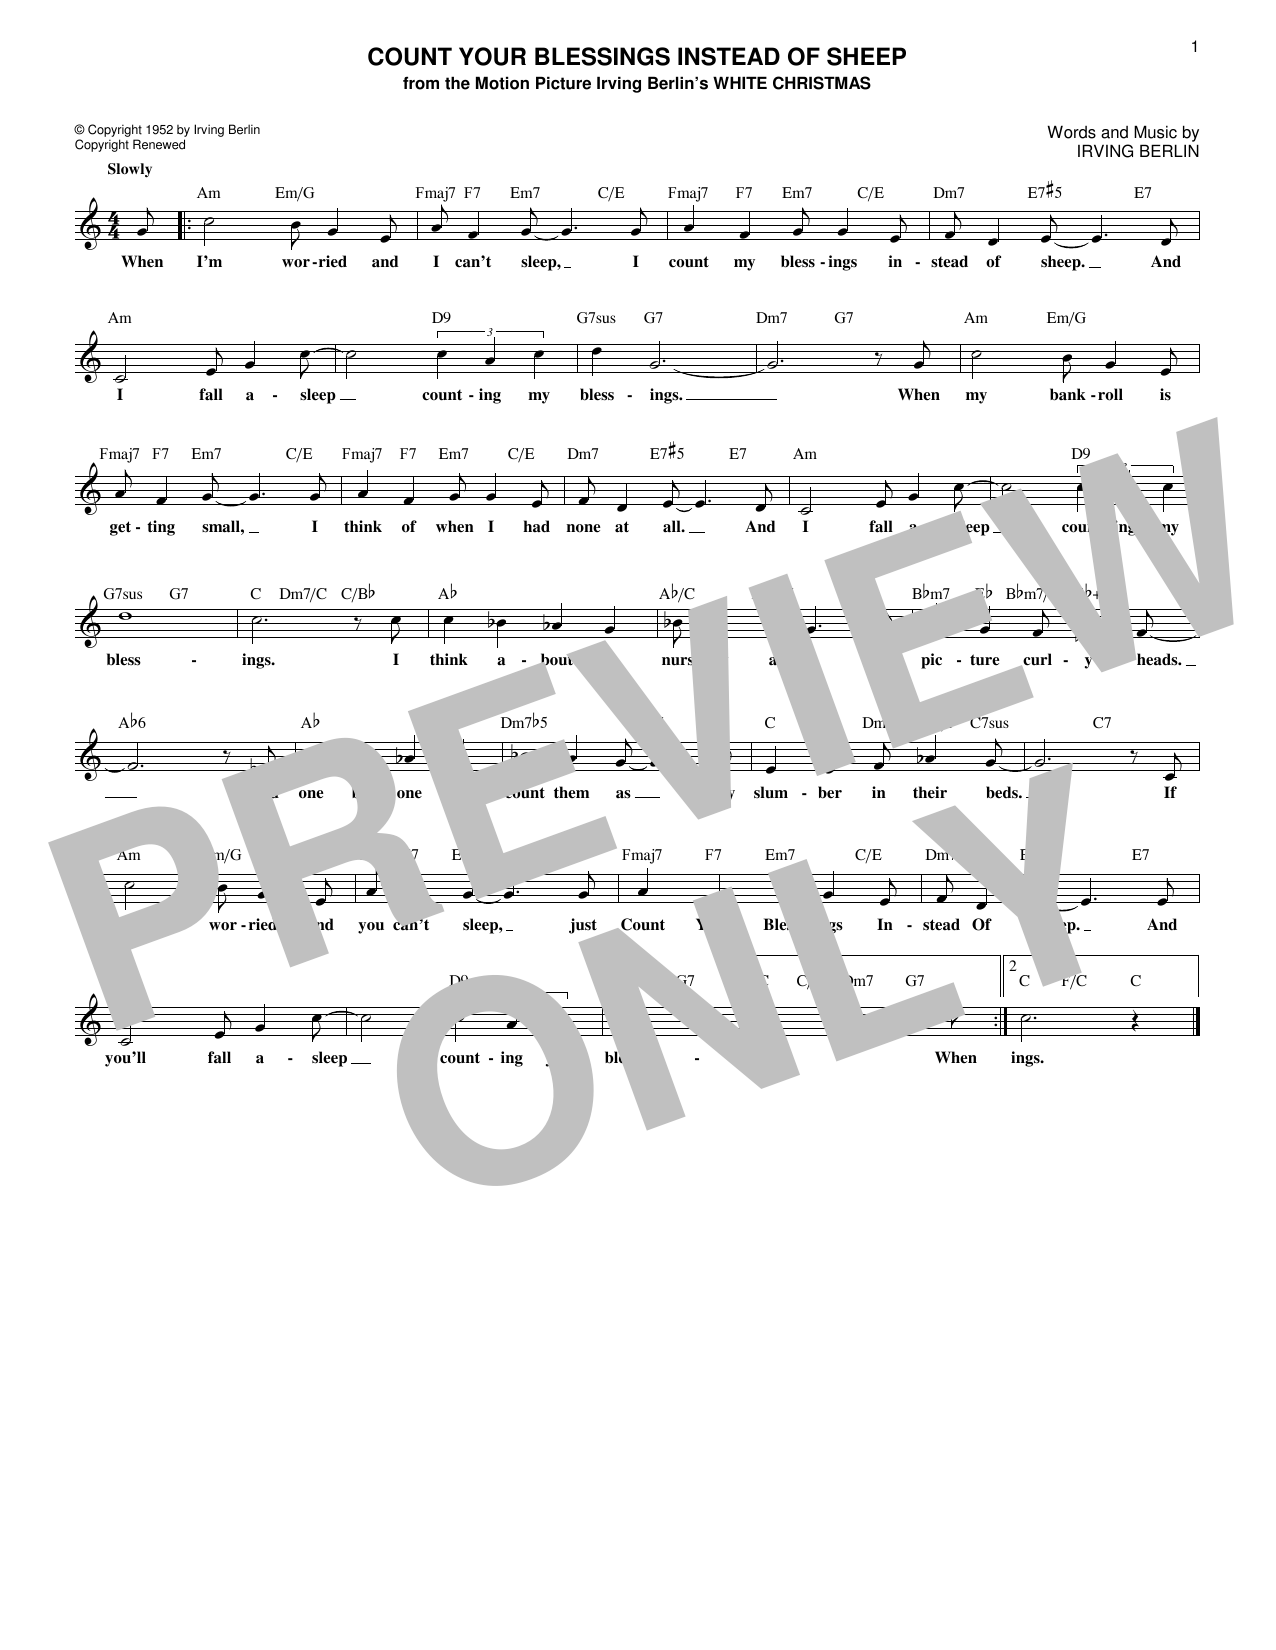 Download Irving Berlin Count Your Blessings Instead Of Sheep Sheet Music